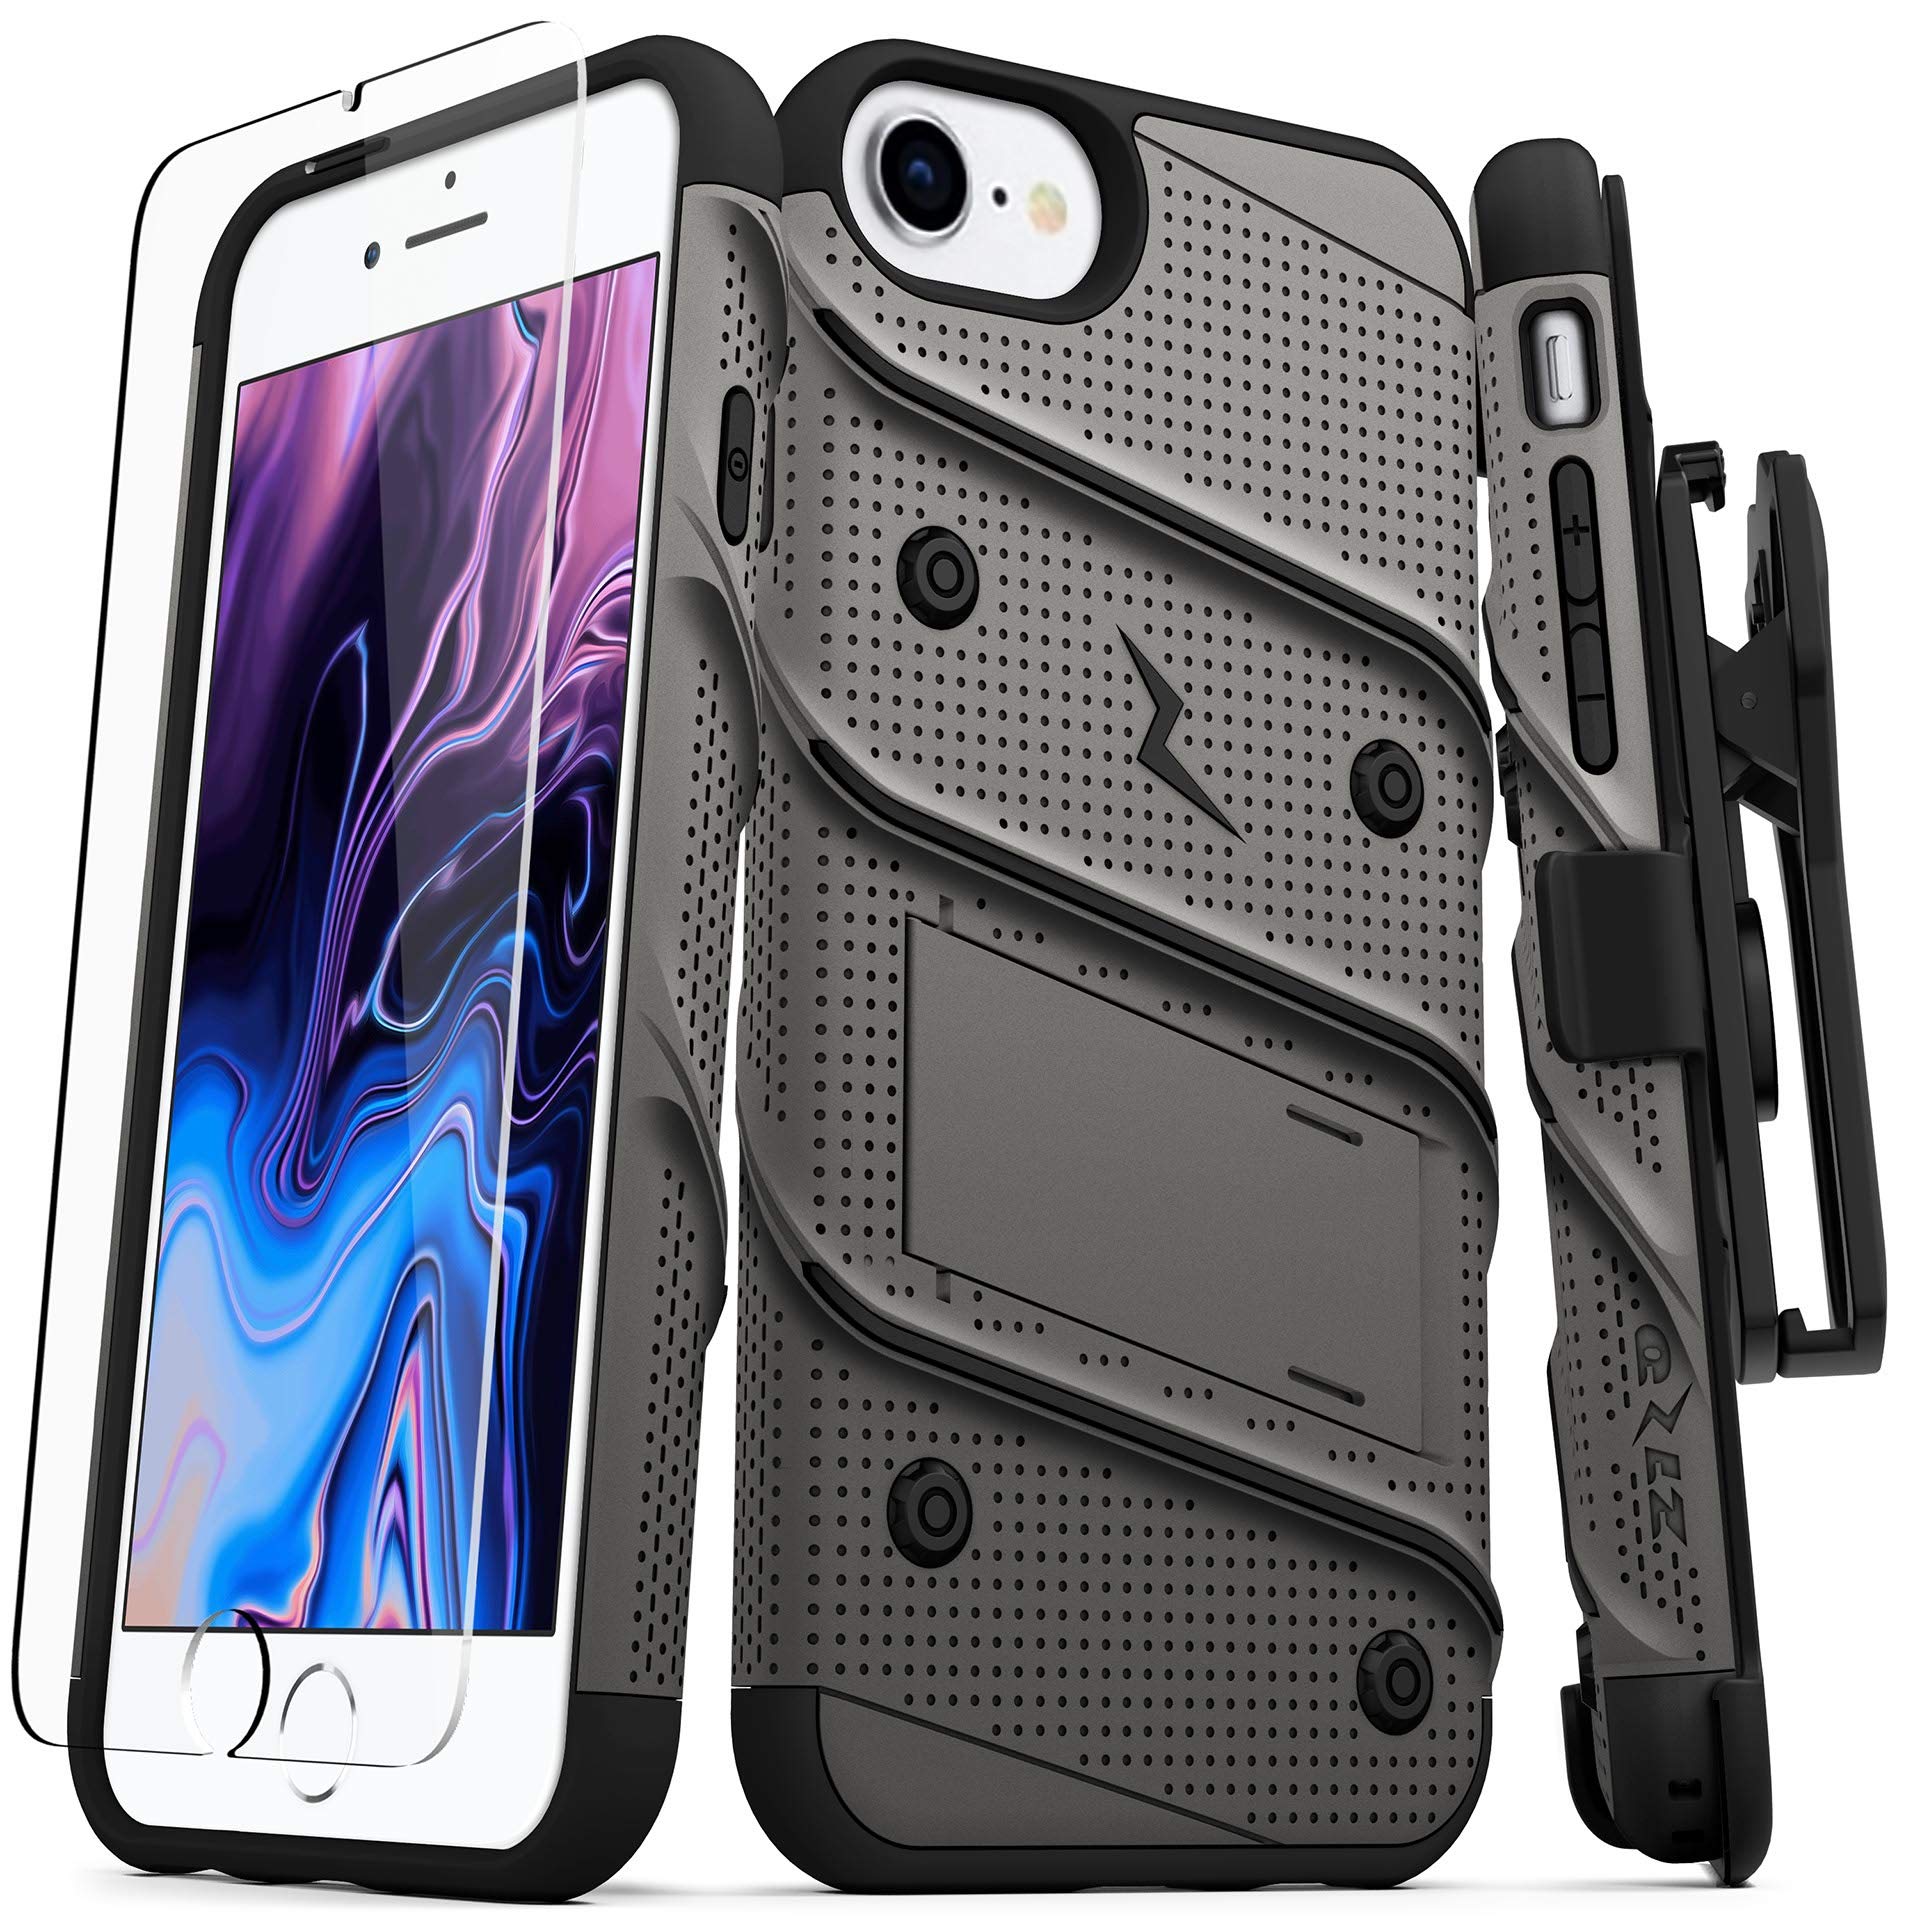 ZIZO Bolt Series for iPhone SE (3rd and 2nd gen)/8/7 Case with Screen Protector Kickstand Holster Lanyard - Gun Metal Gray